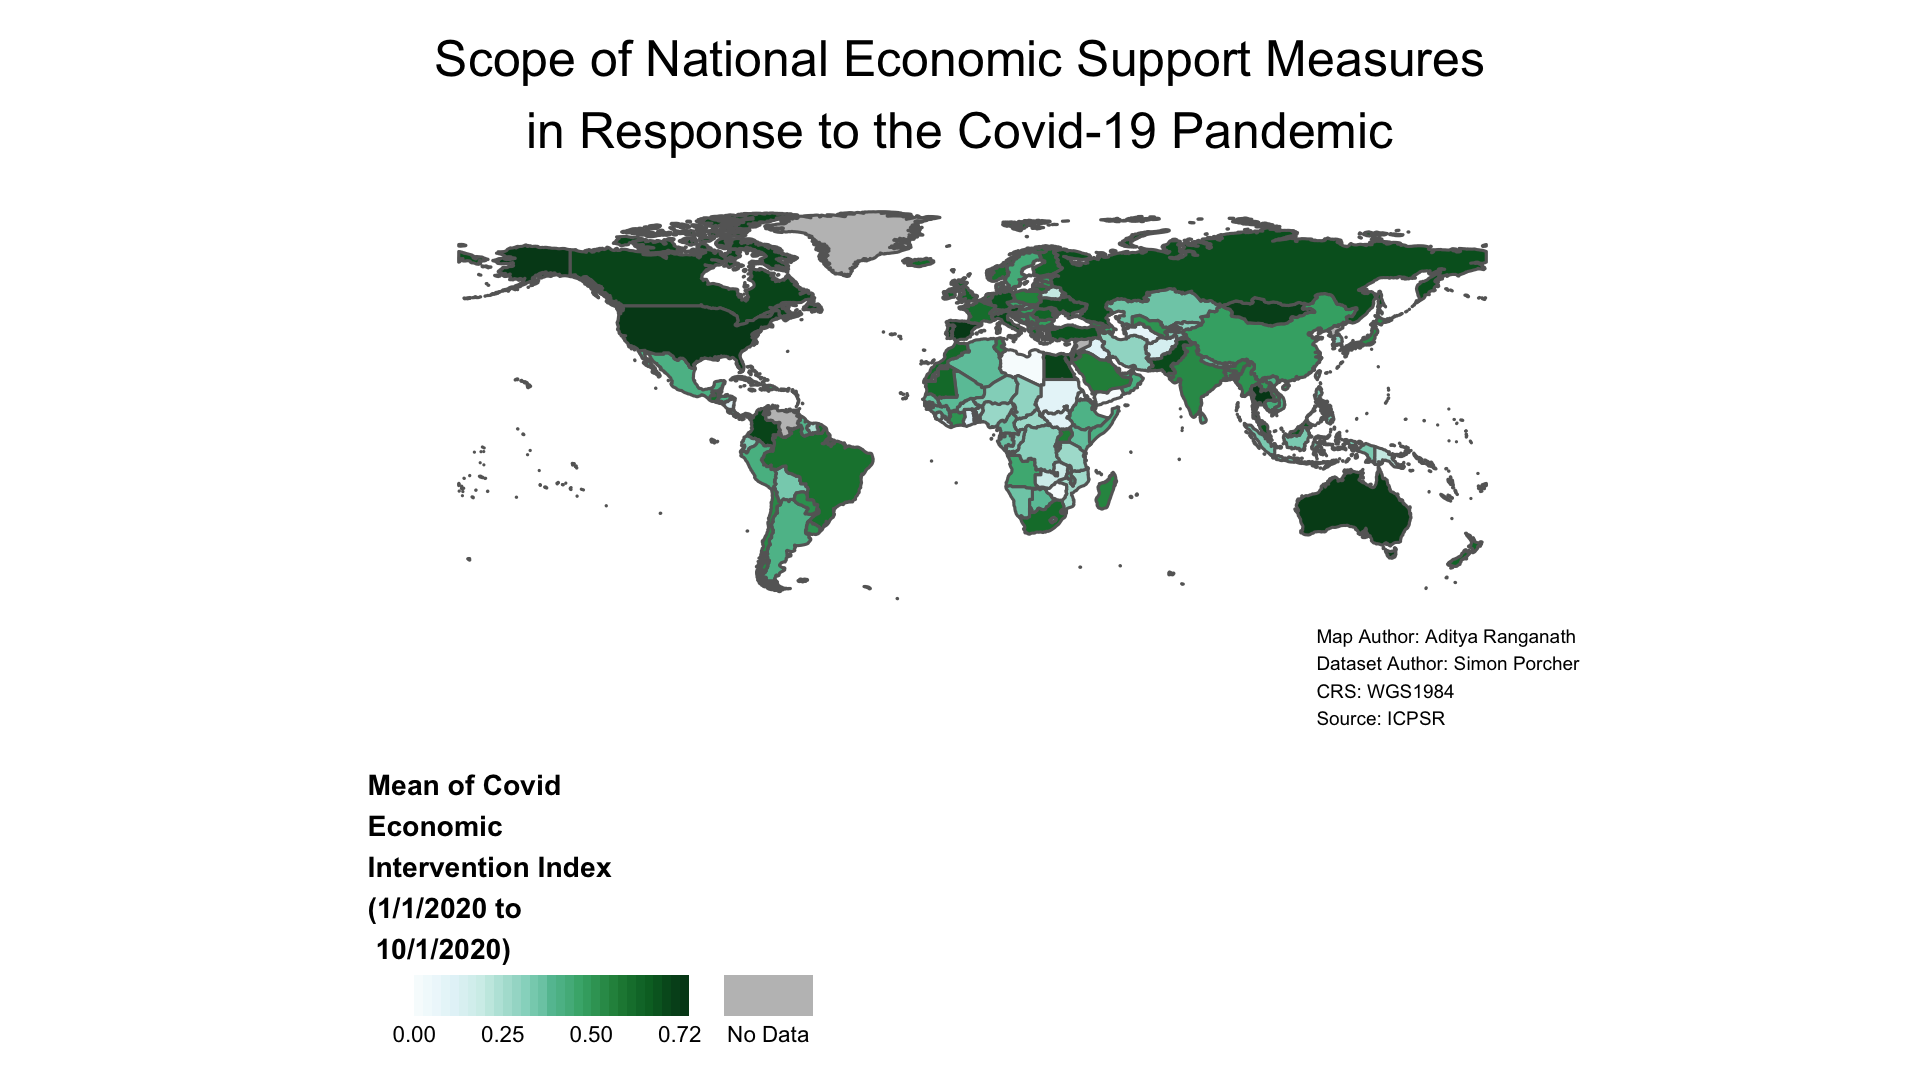 Screenshot of map created and exported in tutorial; the appearance of the map is identical to the one generated in Section 4.5.4 of the tutorial. It is a choropleth world map showing variation in the country-level average of the covid economic intervention index; green color scheme ranging from lighter shades of green to represent lower values of the index and darker shades of green to represent higher values; countries without data are filled in with gray The map legend is a horizontal bar that displays values using a continuous color gradient with custom-chosen numbers arrayed below the gradient to help inform the viewer about the data distribution. The legend is displayed on the bottom-left of the map below and to the left of South America and is titled 'Mean of Covid Economic Intervention Index (1/1/2020 to 10/1/2020)'; the legend title is in bold and placed over the horizontal legend bar. There is no map frame surrounding the map. The map's title is 'Scope of National Economic Support Measures in Response to the Covid-19 Pandemic', which is split into two lines and centered at the top of the map above the northern-most countries. The map credits are split across four lines, and printed on the bottom-right of the map below Australia and New Zealand.